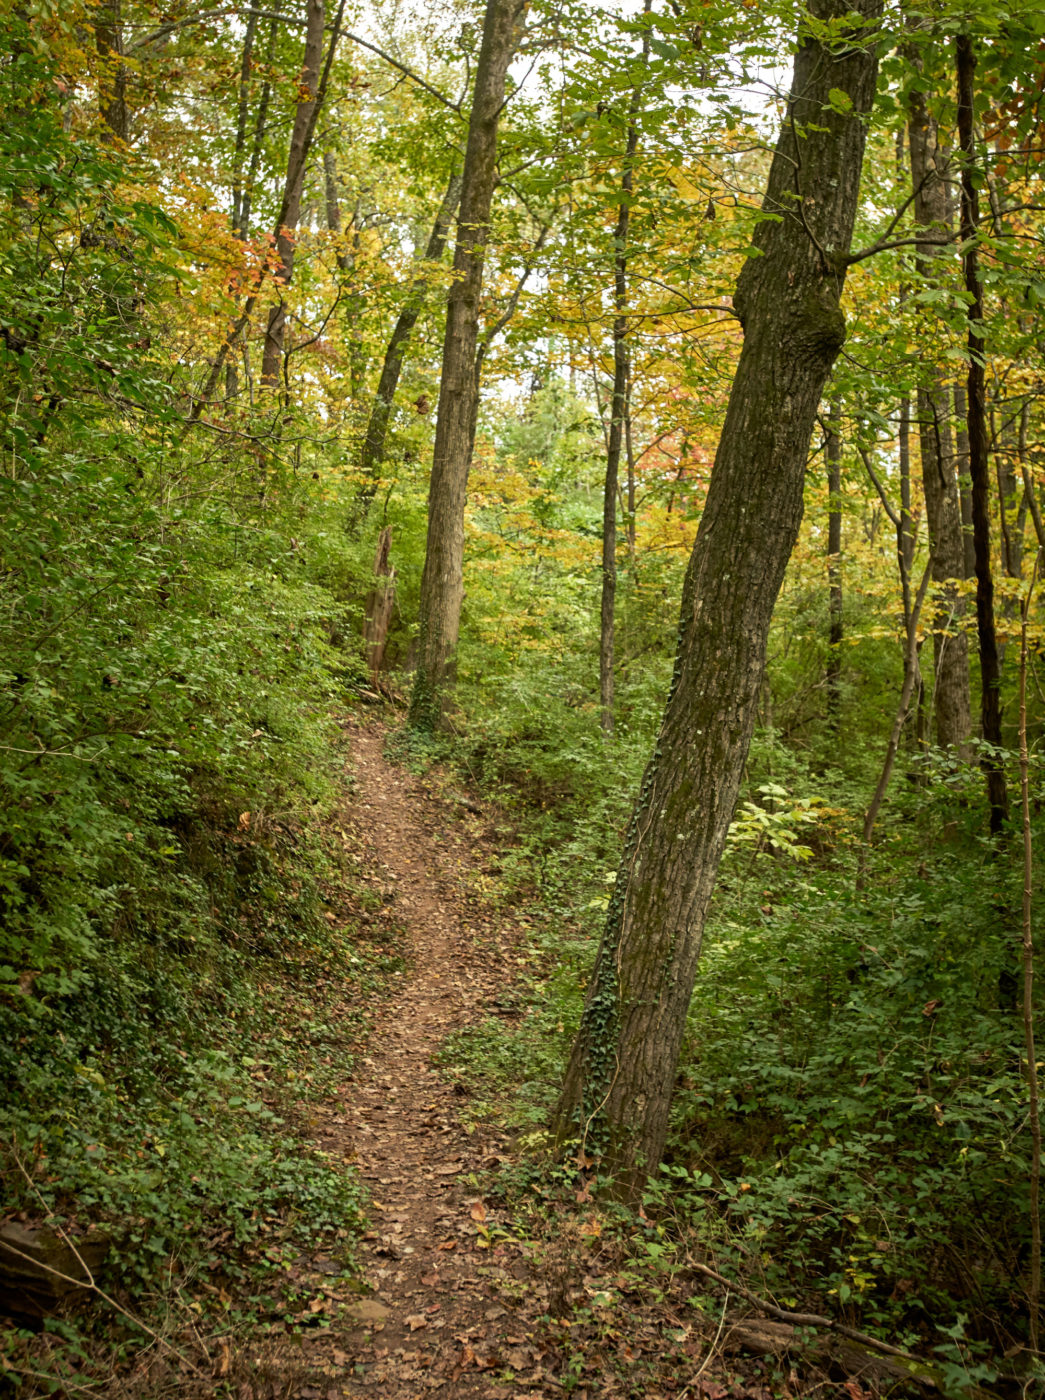 A view of a trail through the woods at the quarry.